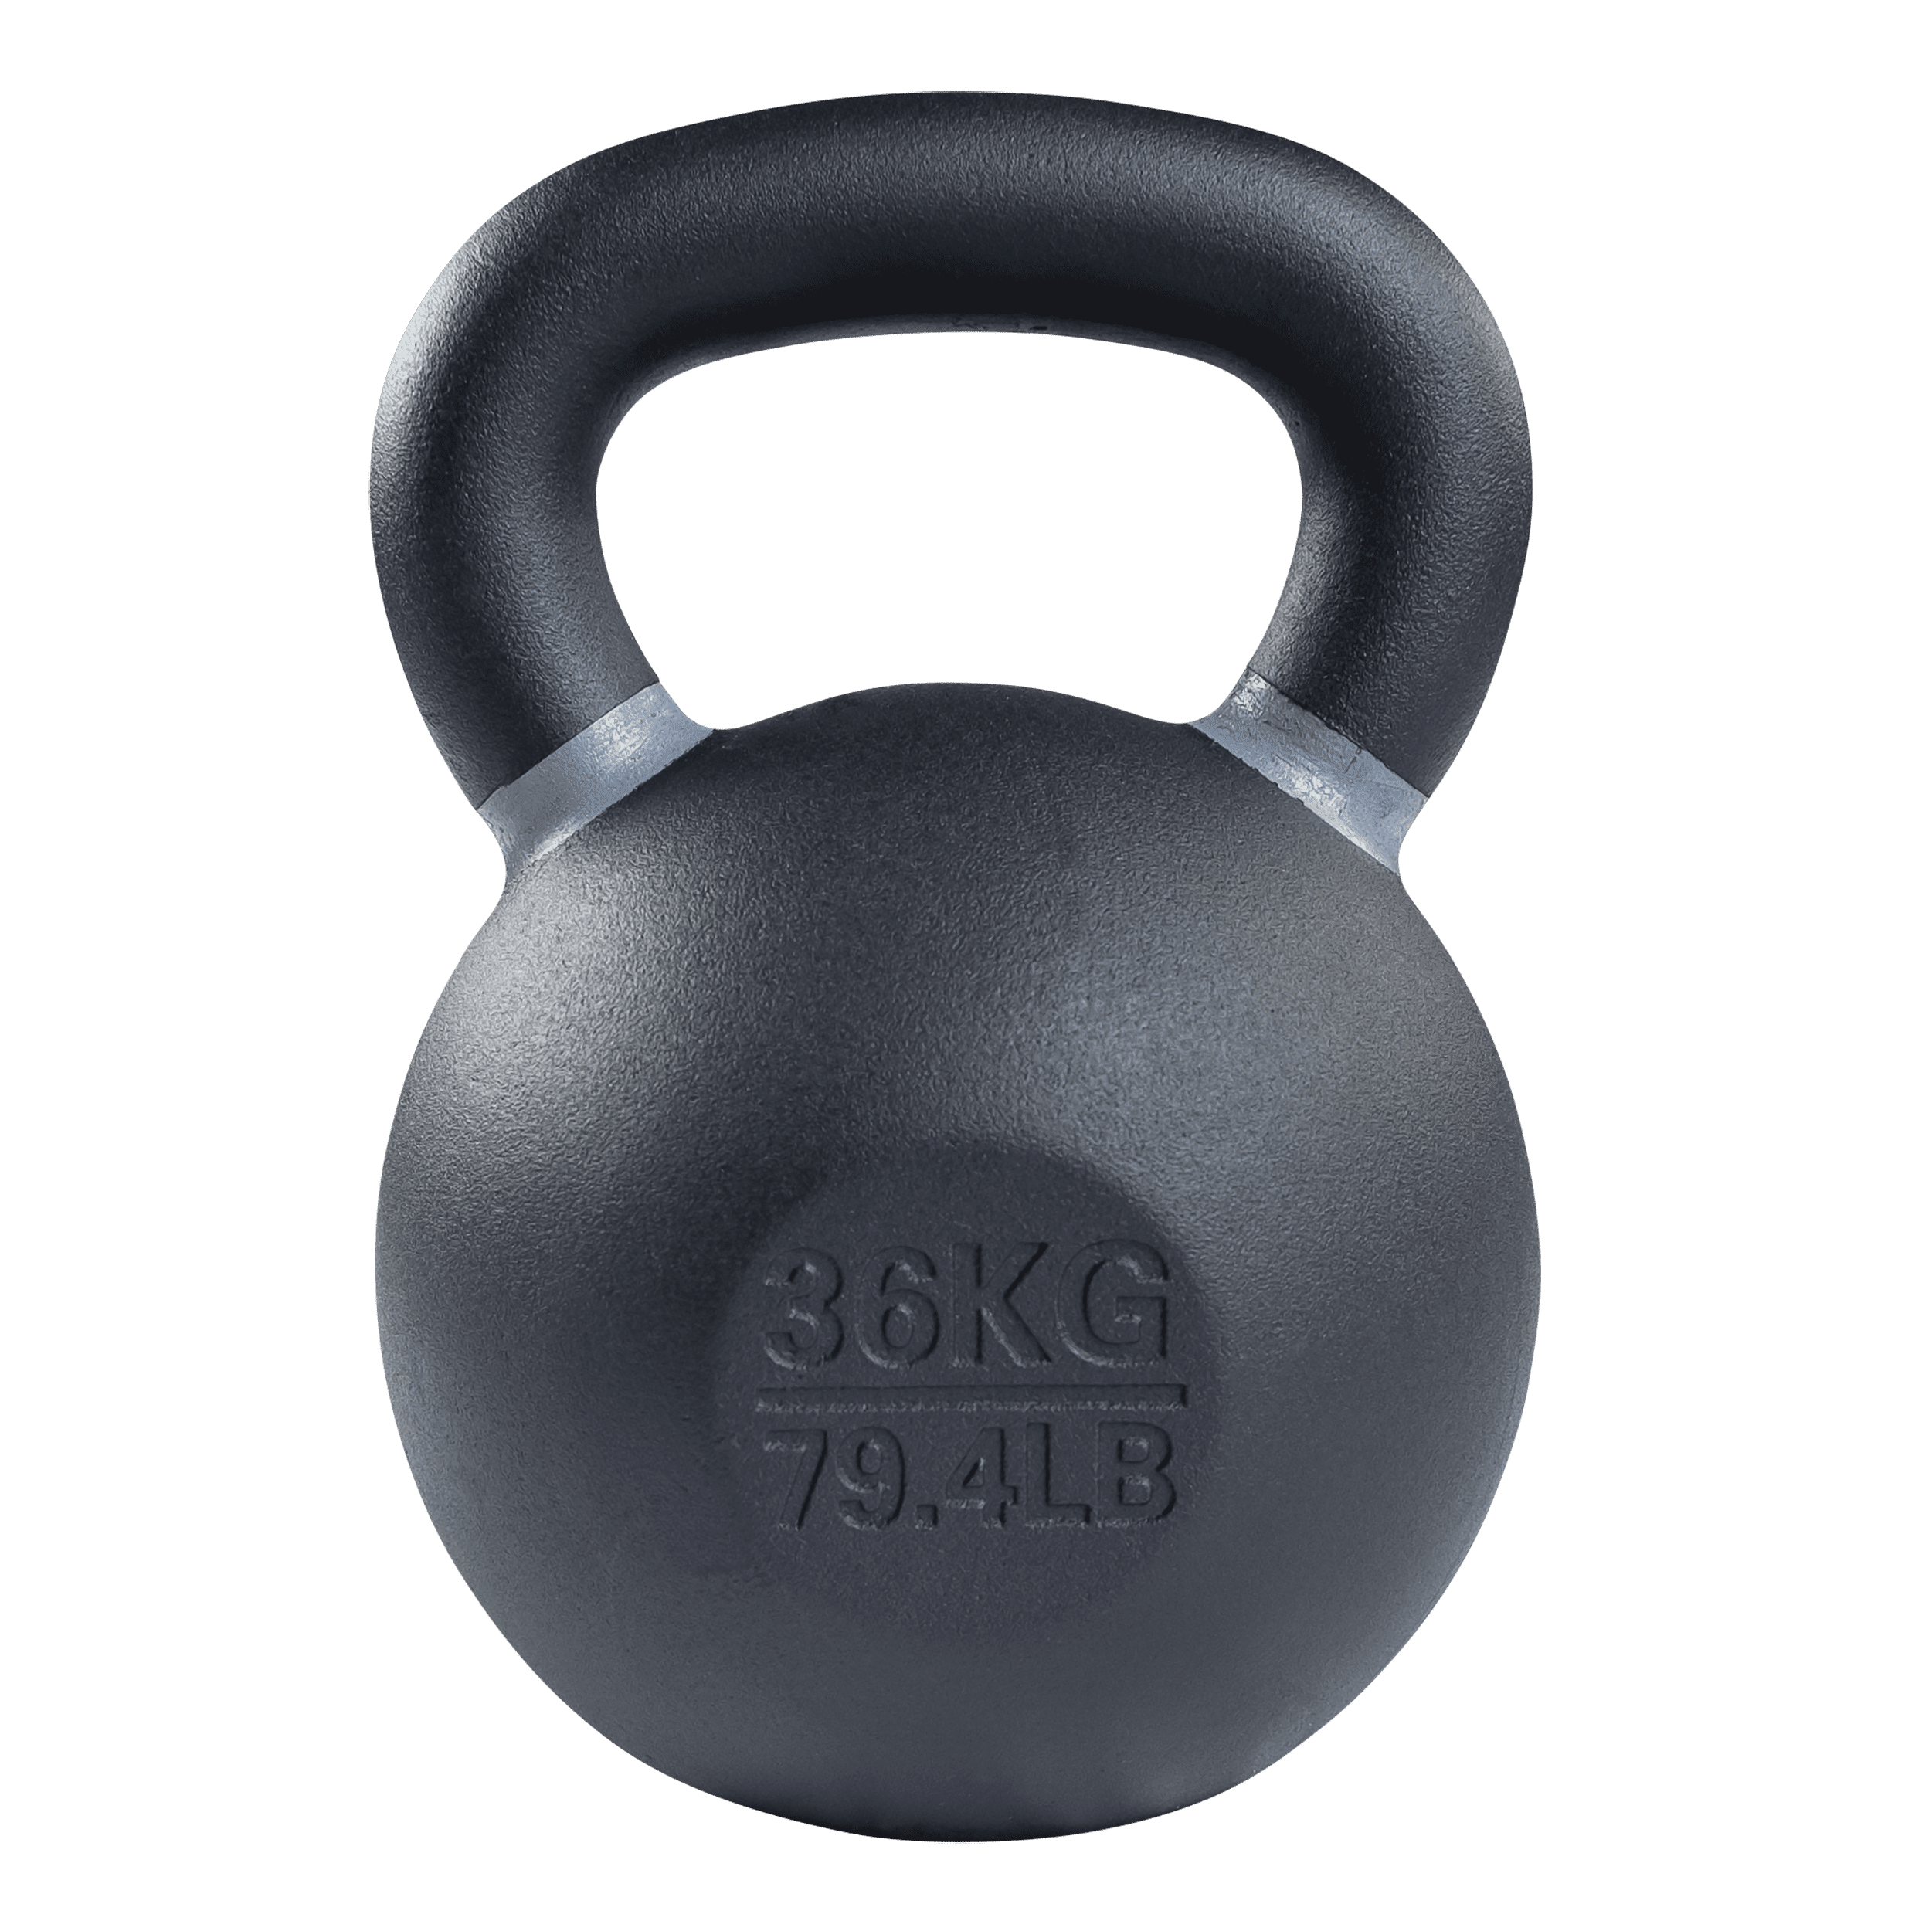 Cast-iron kettlebell with rubber protective coating 20 kg – Thorn Fit |  Crossfit equipment | Manufacturer of crossfit equipment